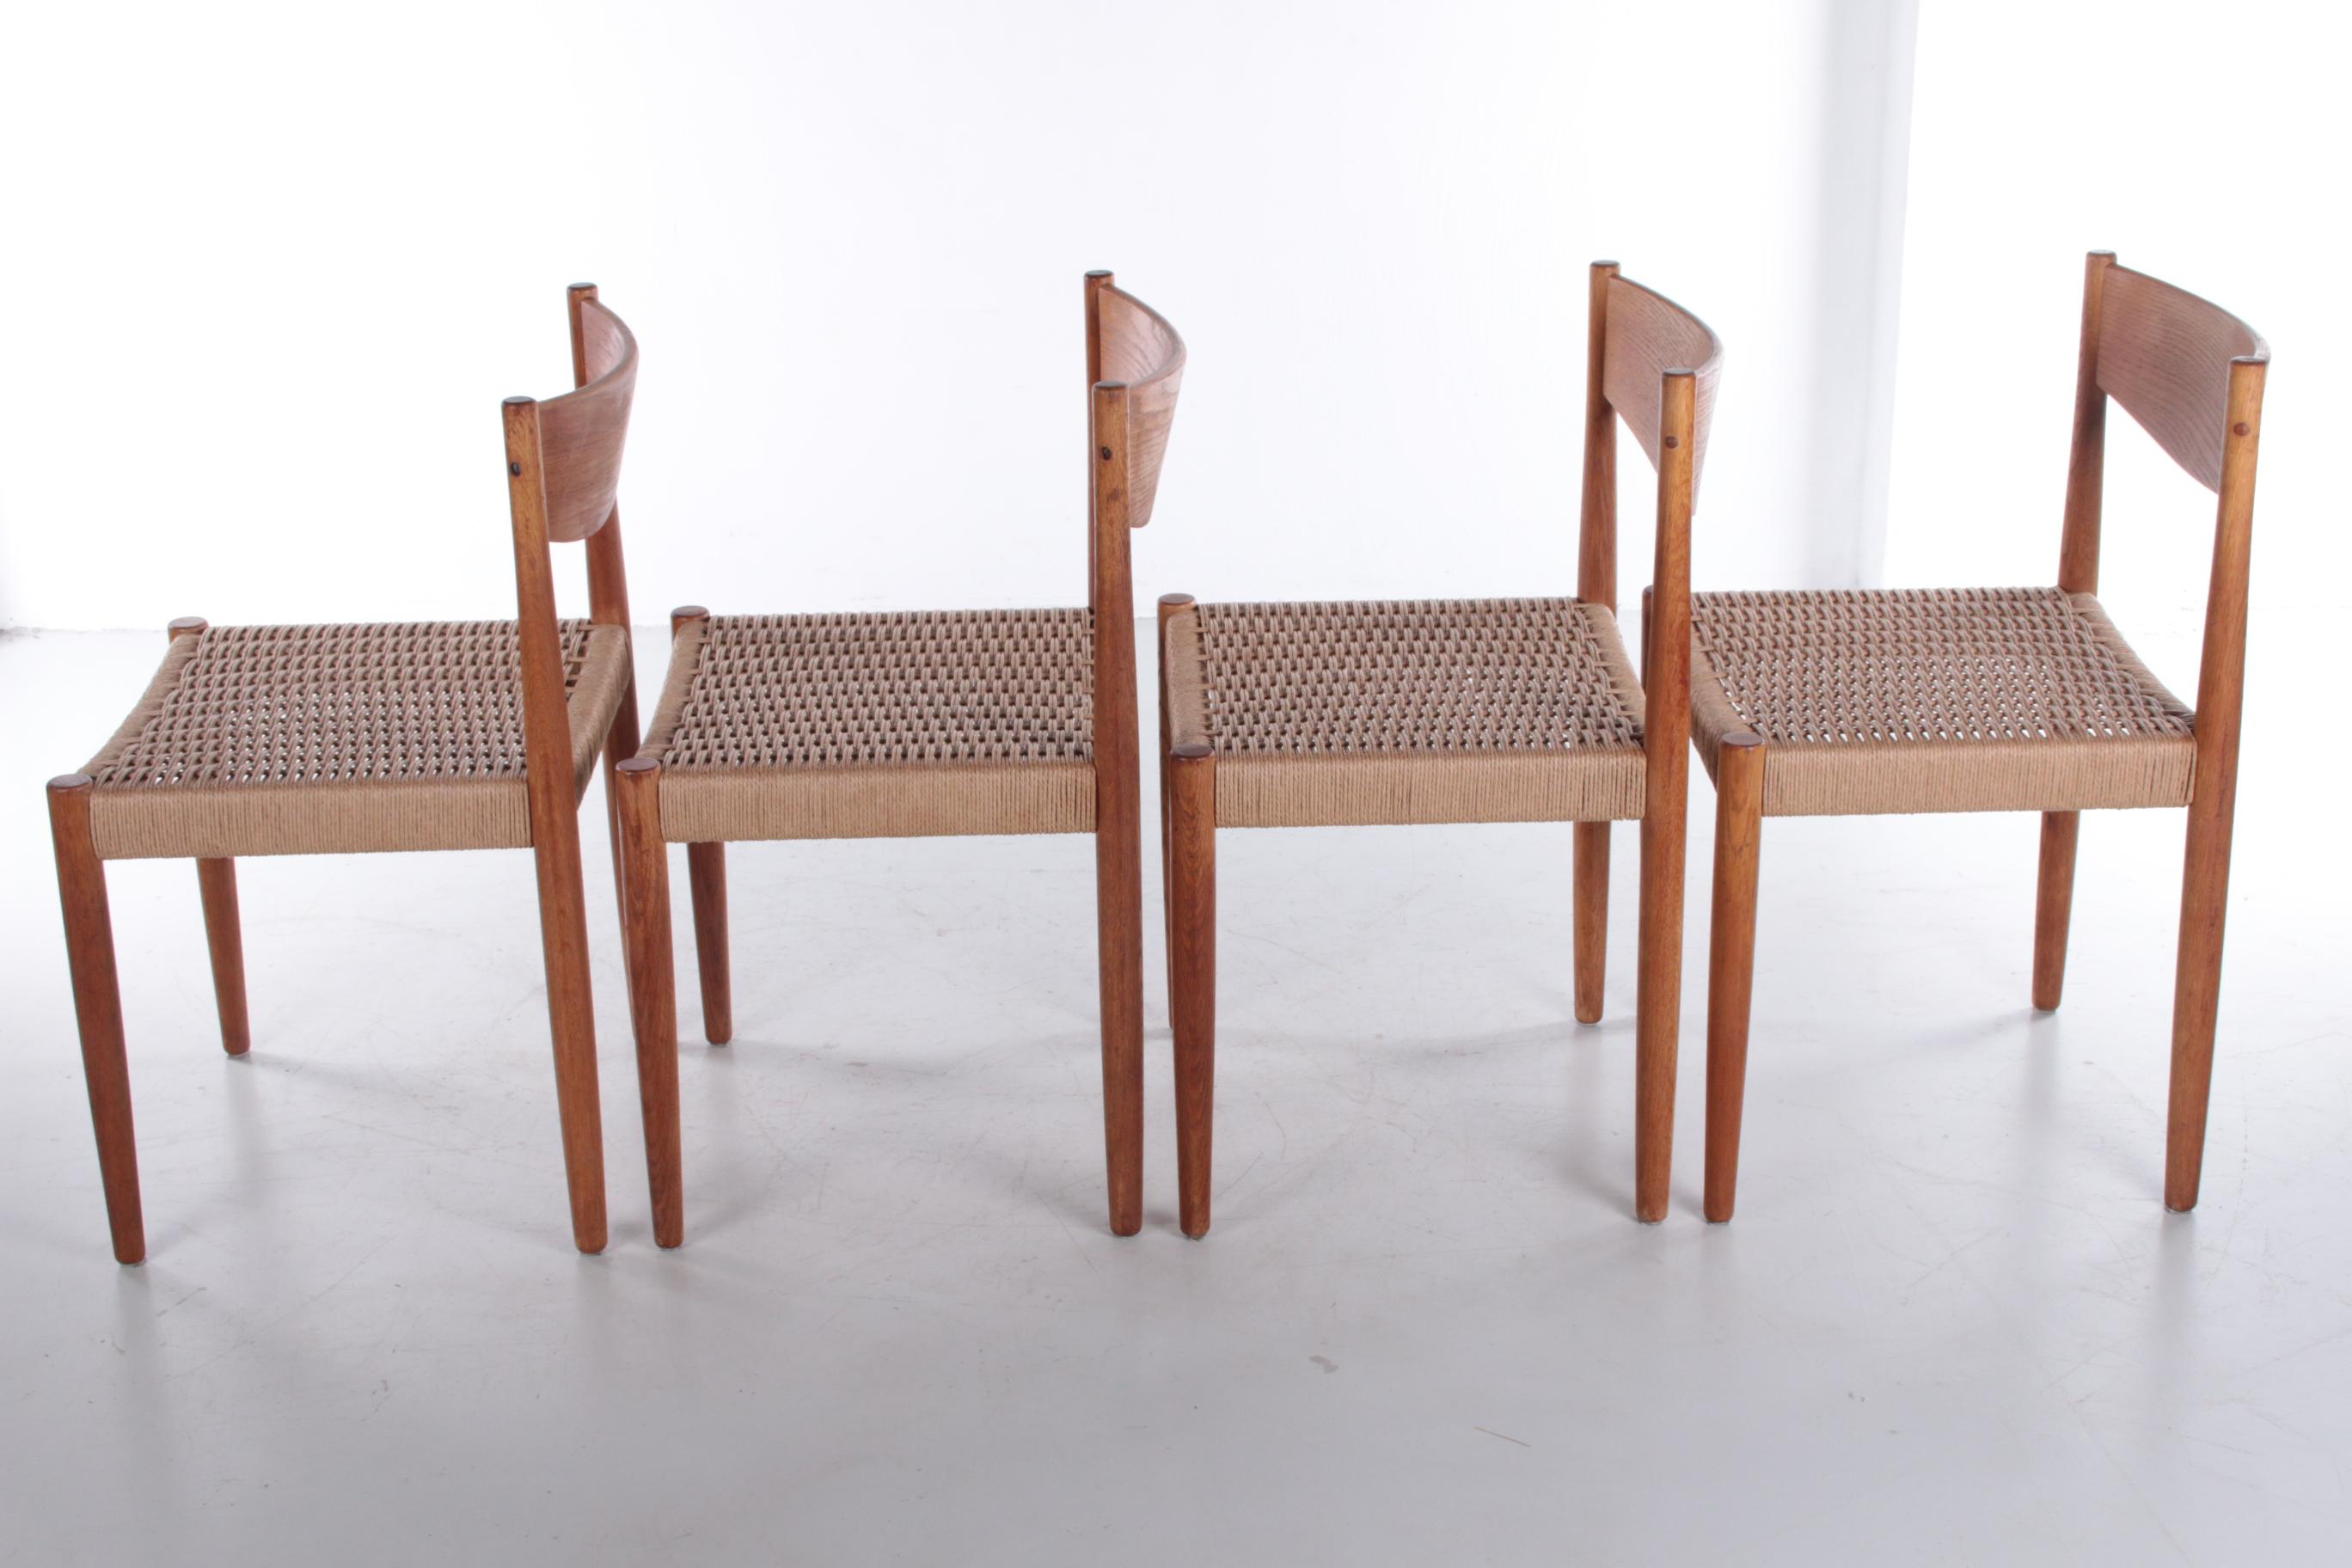 Mid-20th Century Set of 4 Dining Room Chairs by Poul Volther for Frem Røjle, 1960s